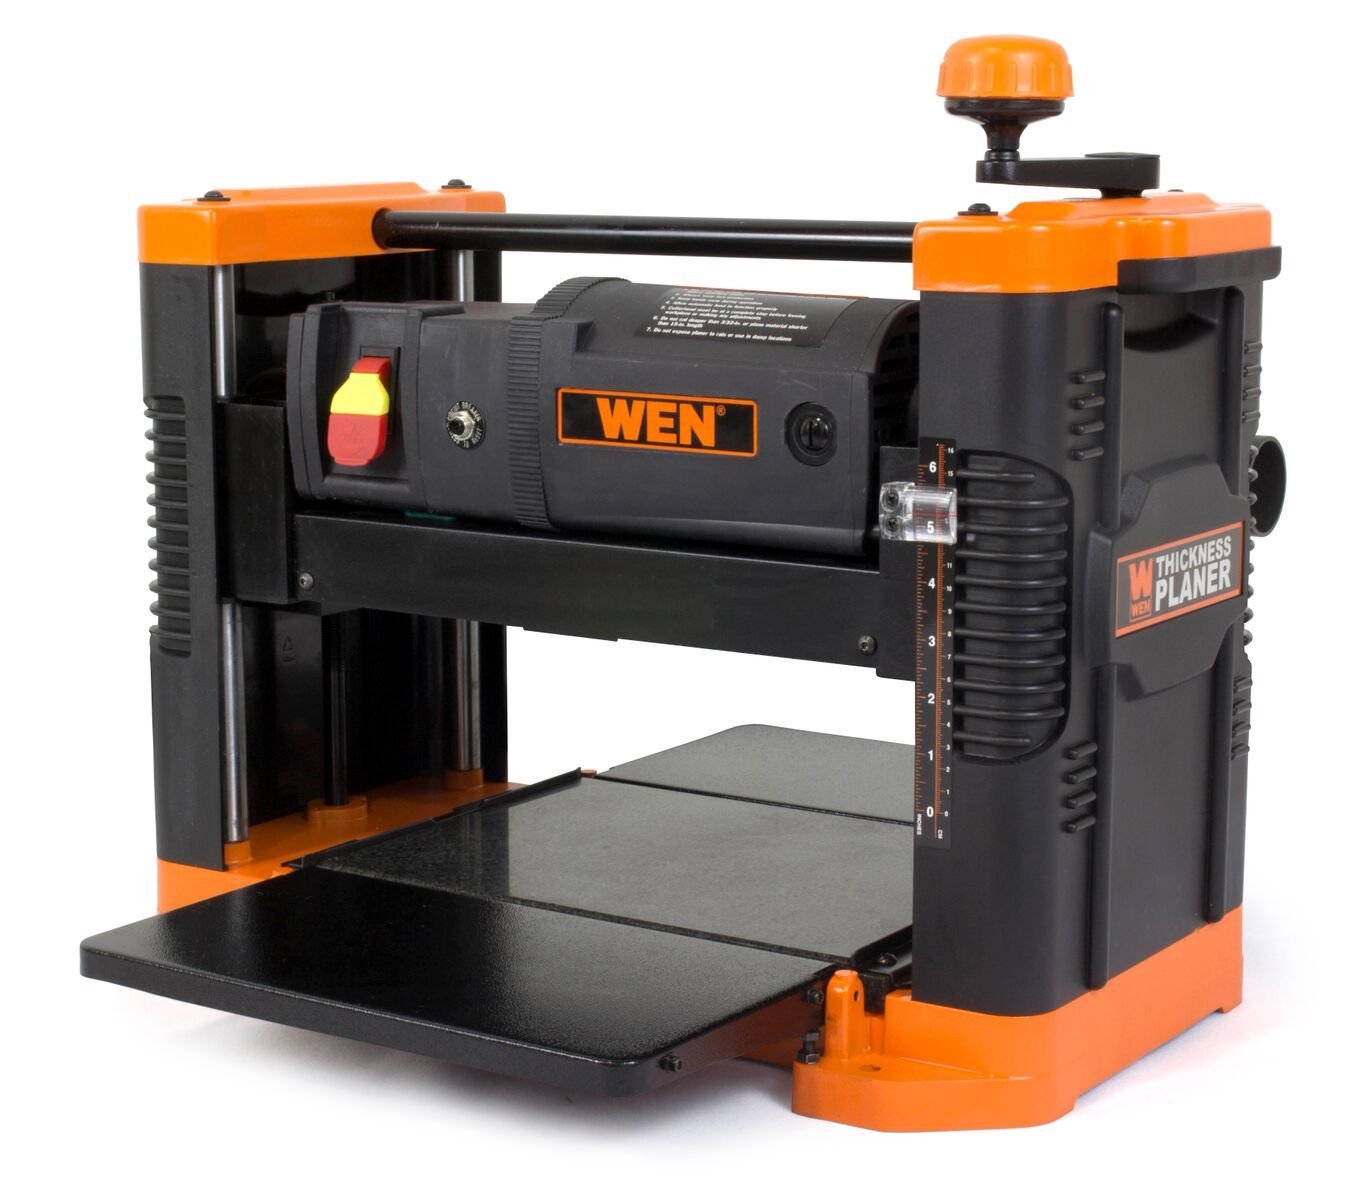 WEN 6550 125-Inch 15A Benchtop Thickness Planer with